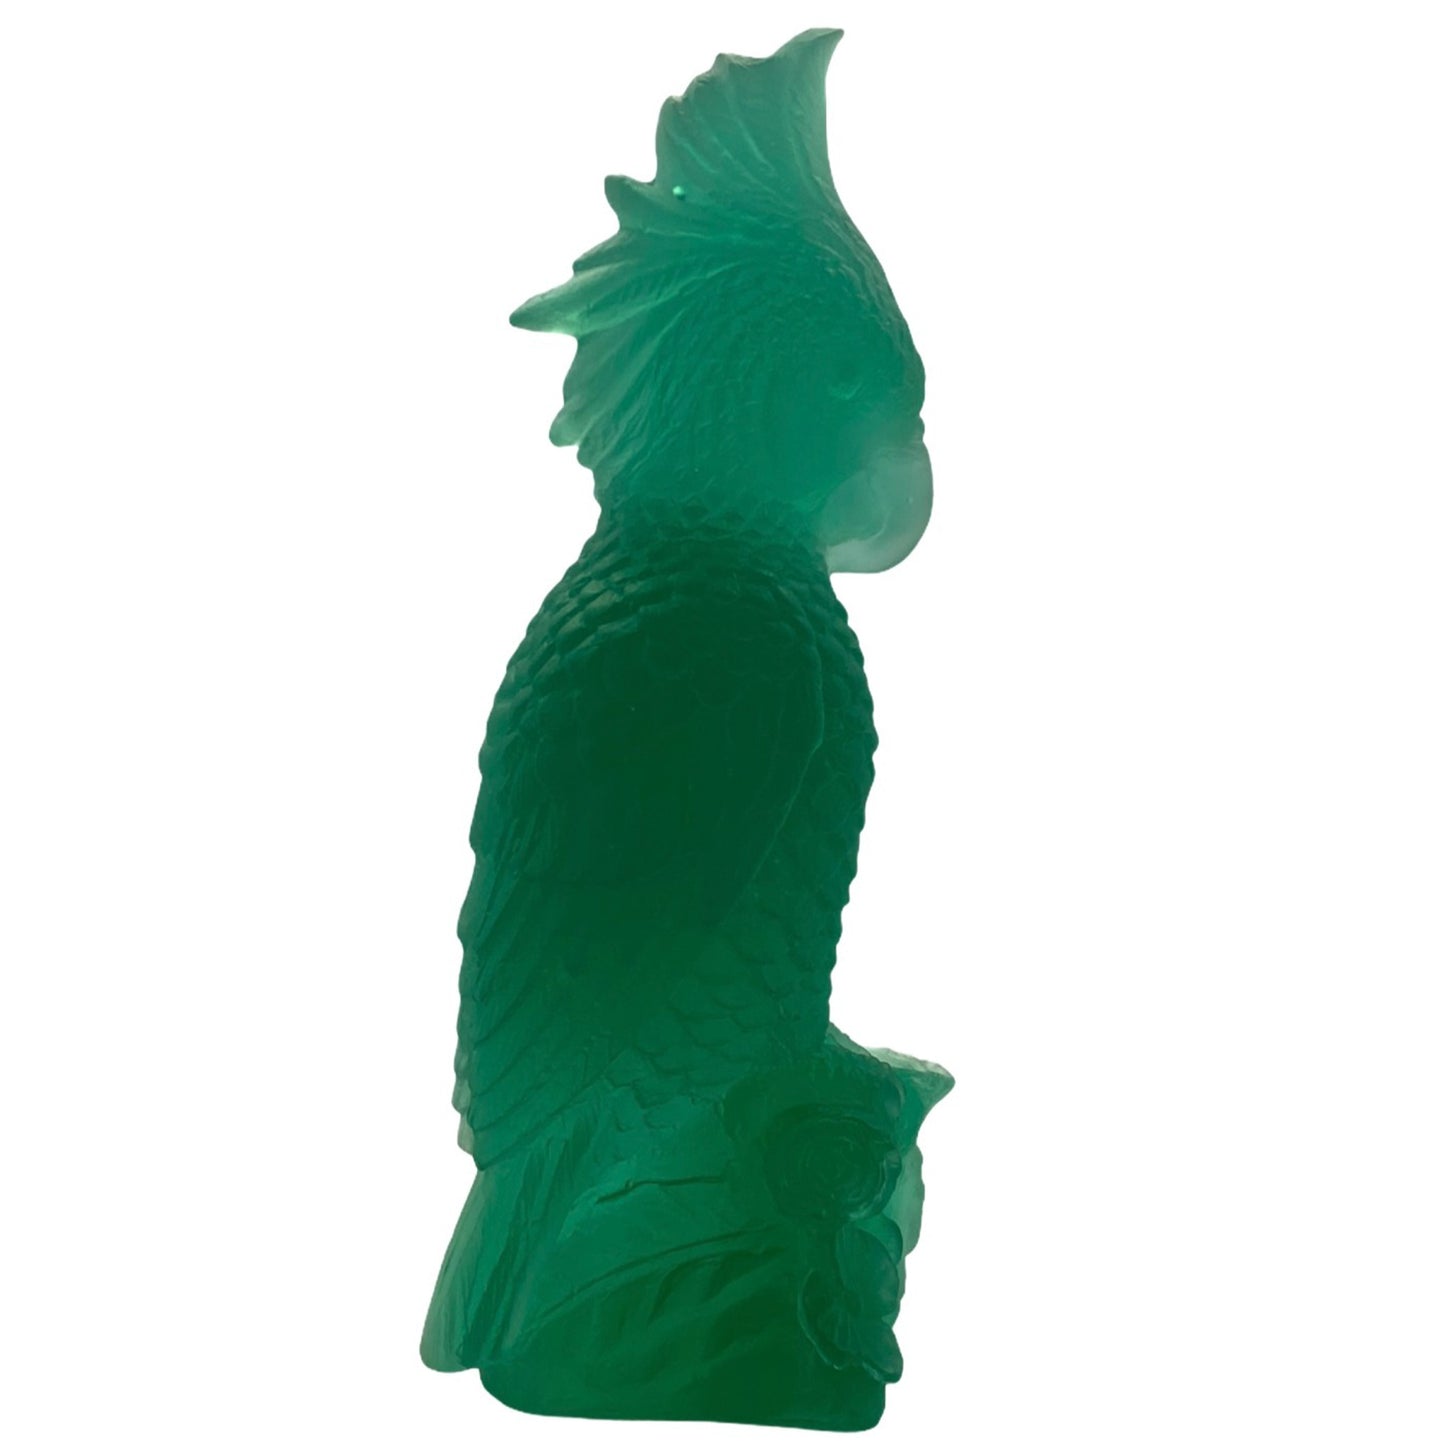 Rio Parrot Cast Glass Sculpture Emerald green on white background side view